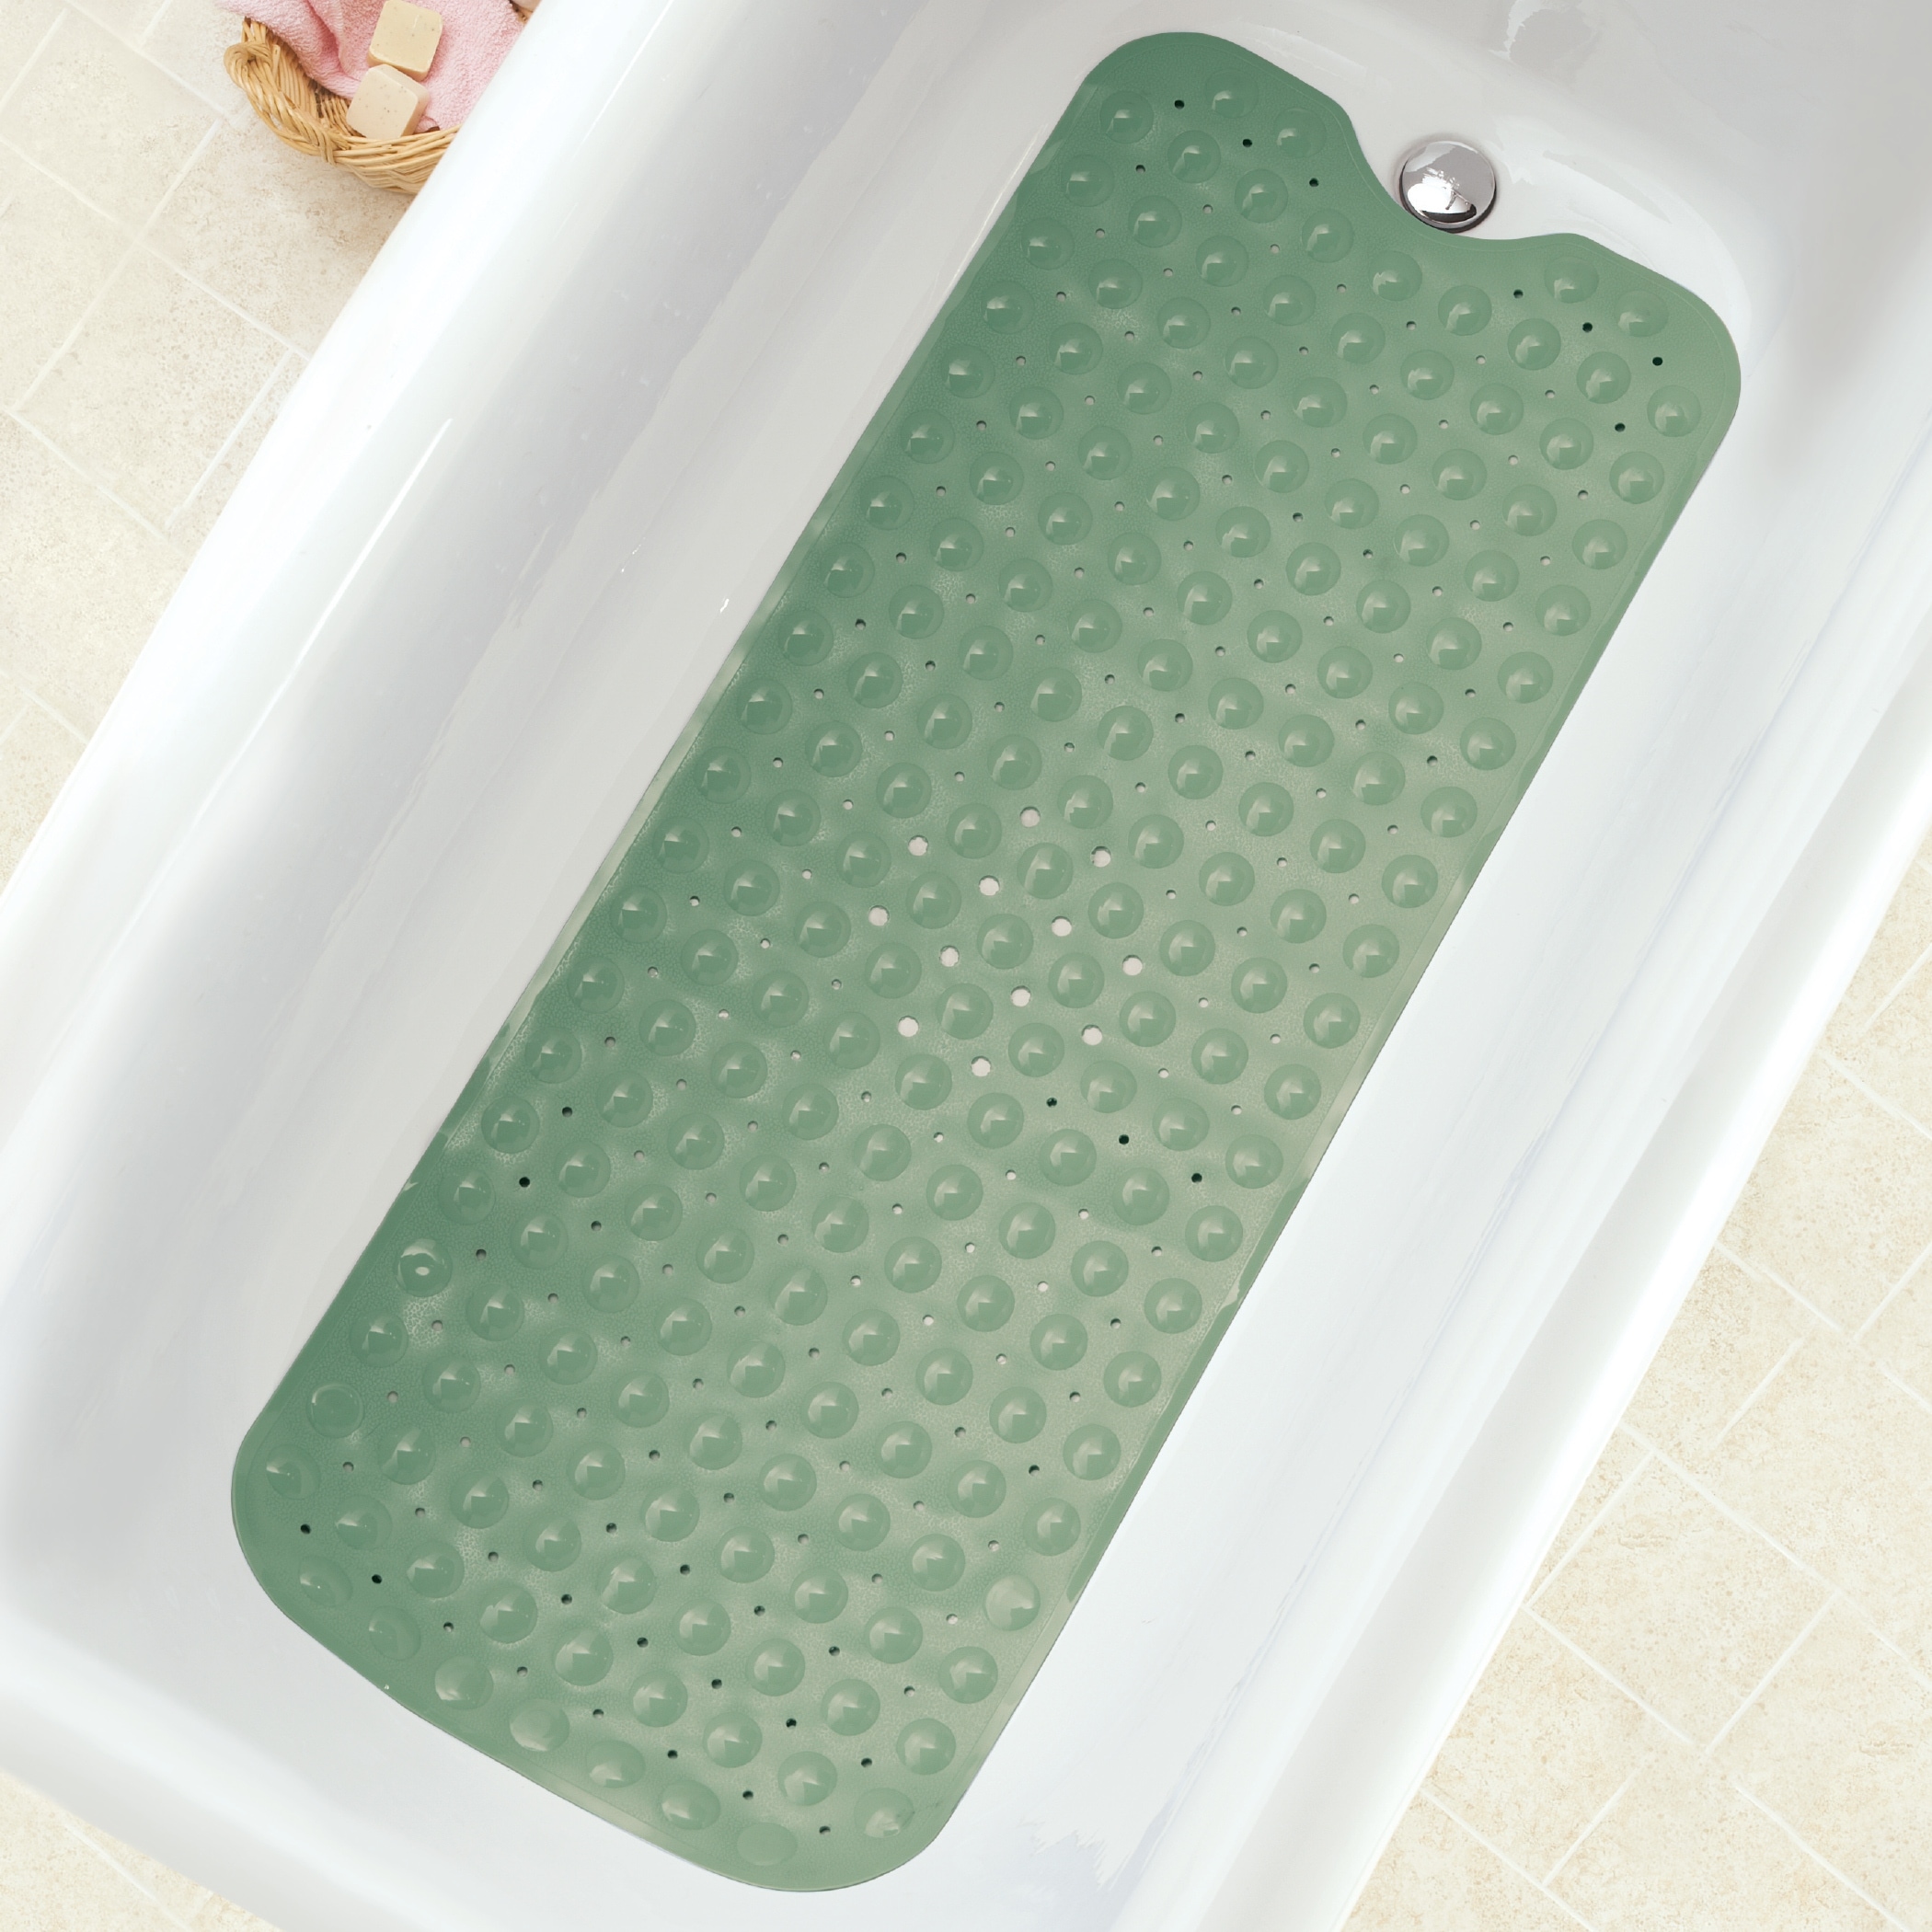 https://ak1.ostkcdn.com/images/products/is/images/direct/c4dce9d781950c5dc8ee2e7e08363ac60ecf9939/Extra-Long-Cushioned-Bathtub-Mat.jpg